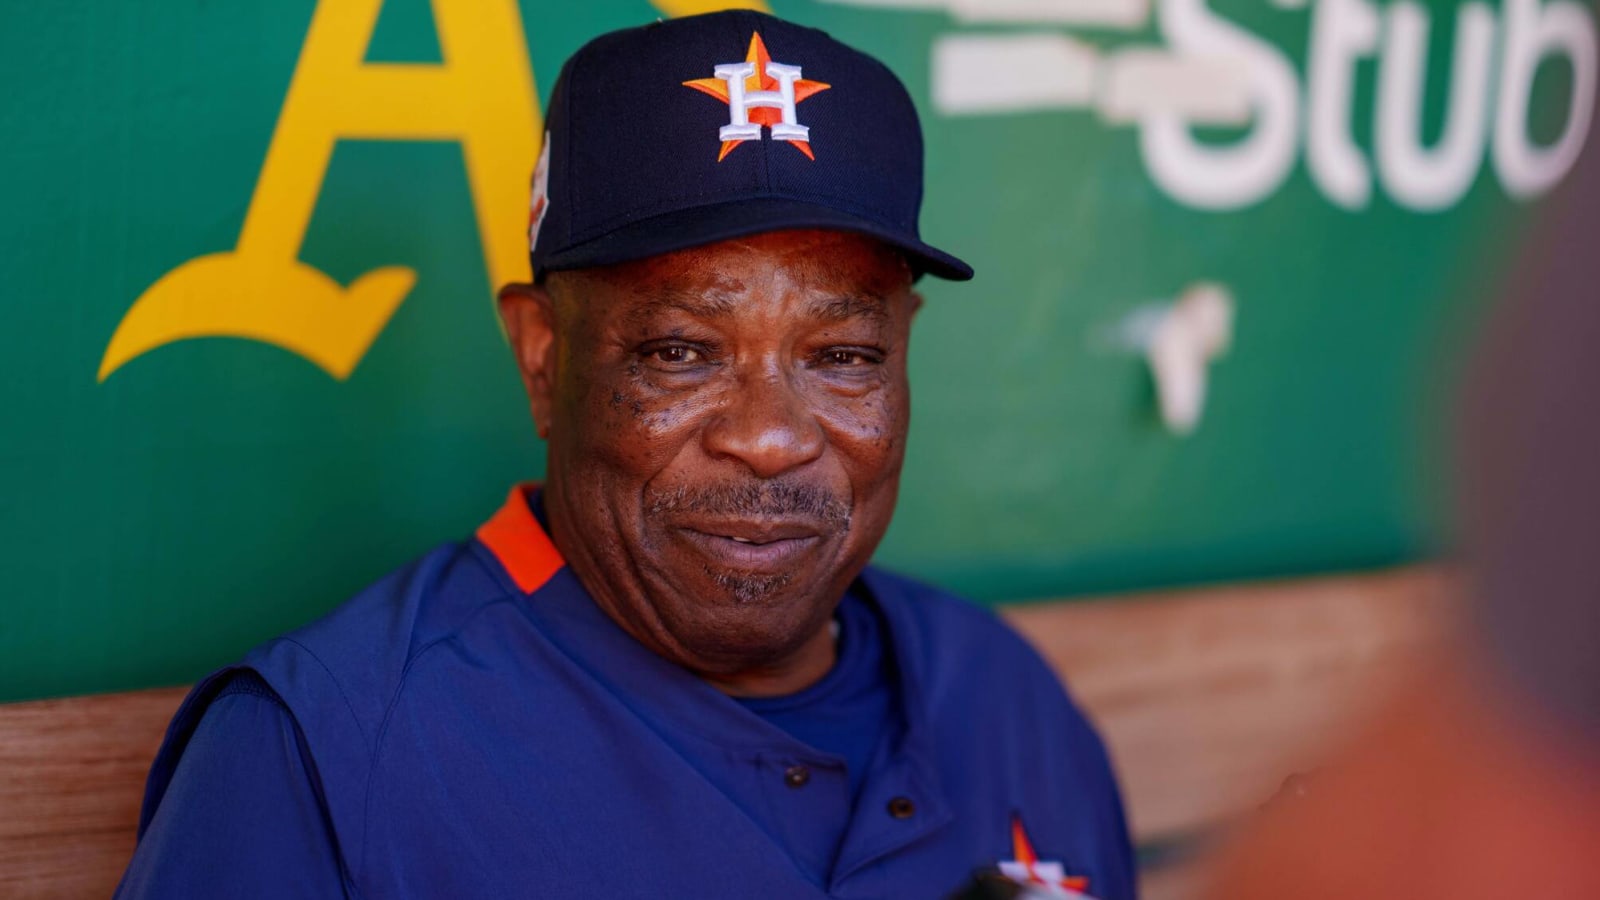 Dusty Baker reminisces about days of amphetamines in MLB